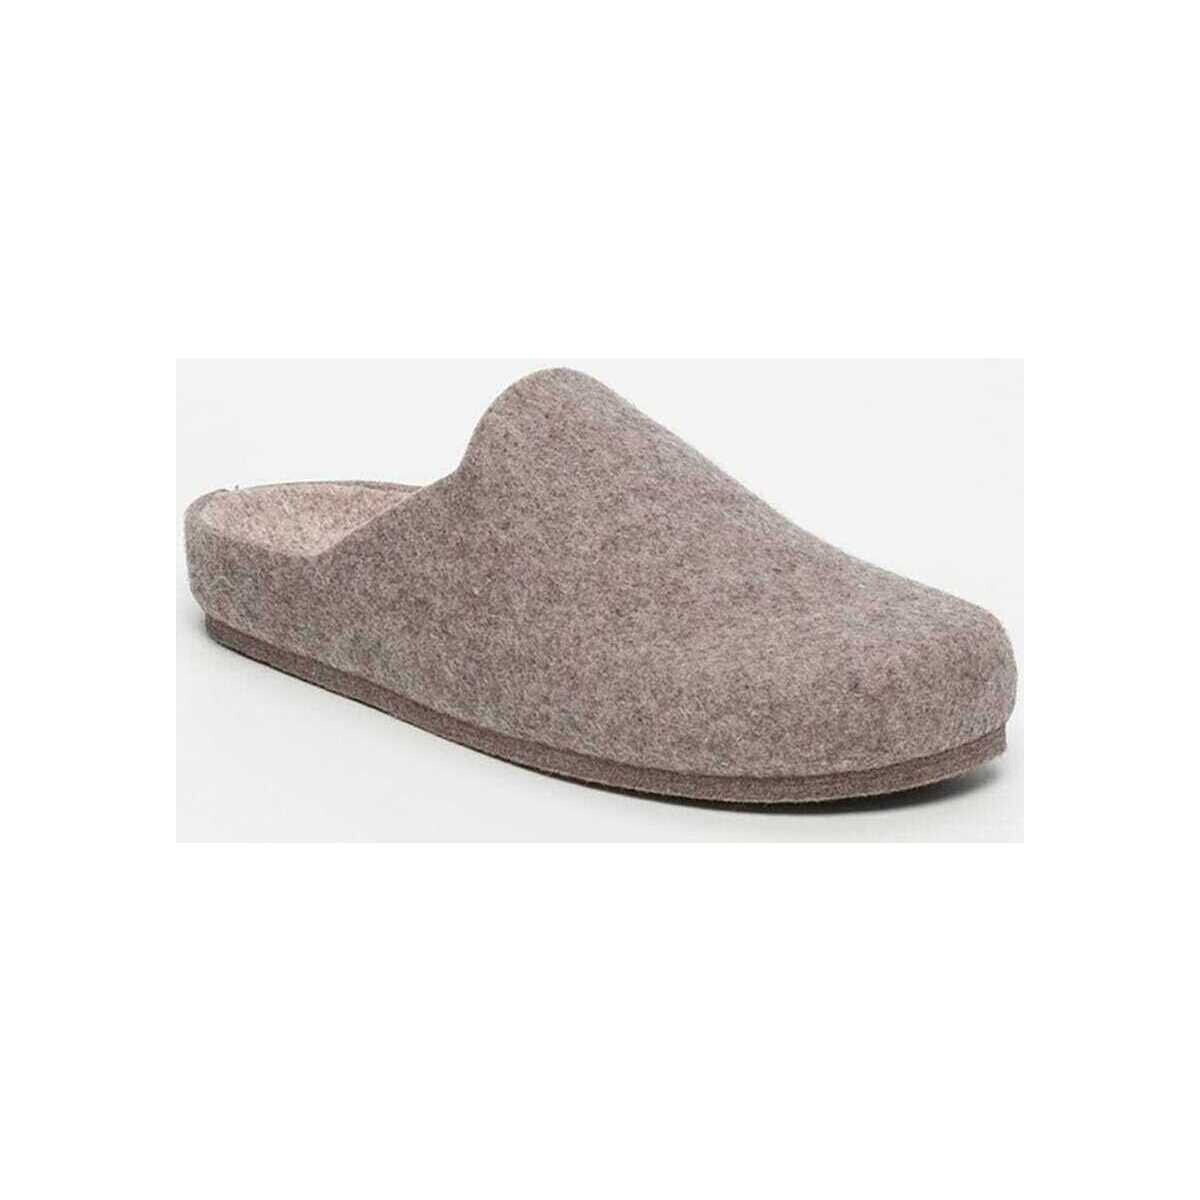 Chaussures Chaussons Amos Chaussons mules La taupe - Taupe Marron